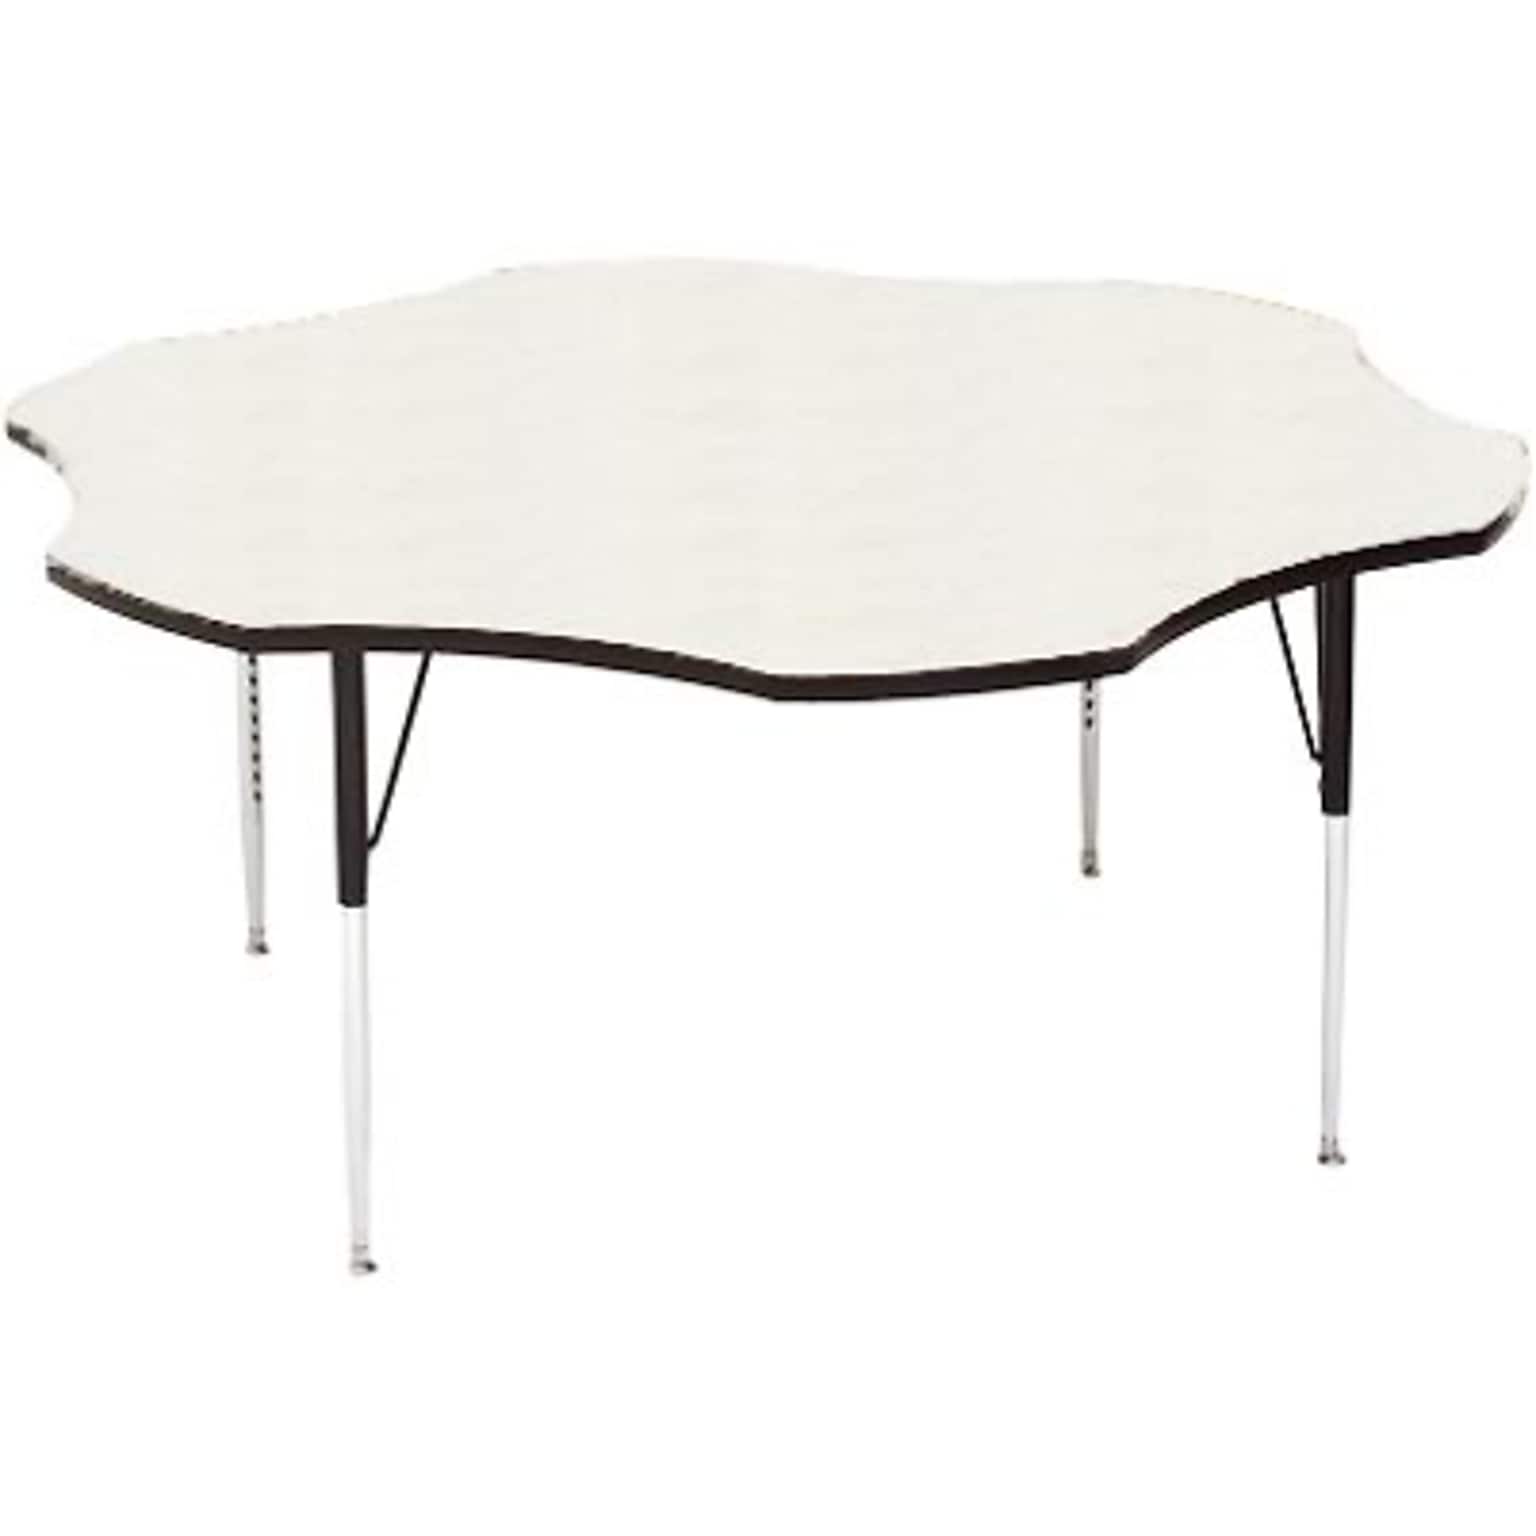 Correll® 60 Flower Shaped Heavy Duty Activity Table; White High Pressure Laminate Top